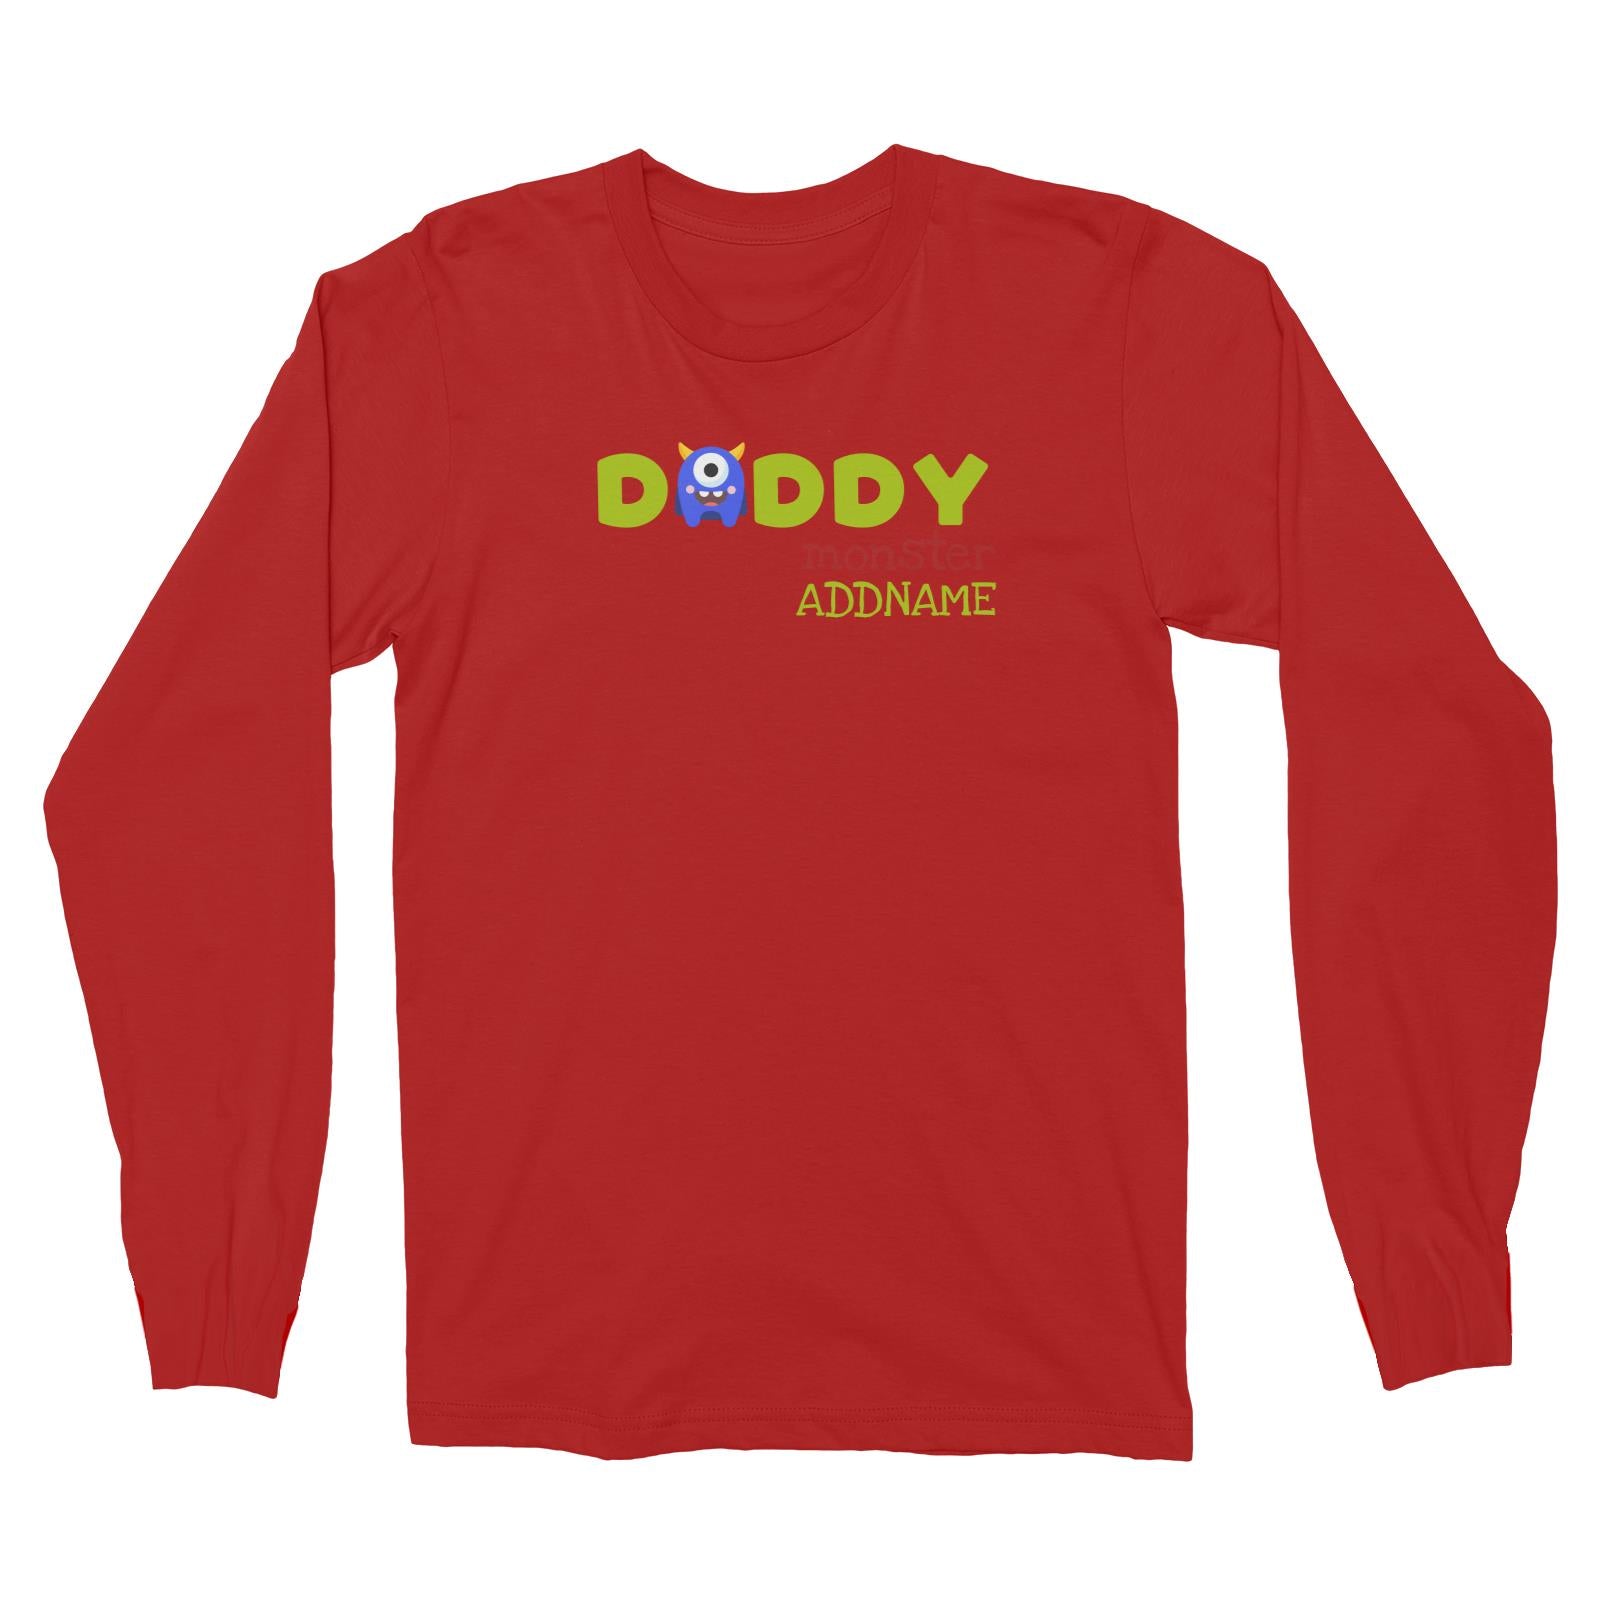 Blue Daddy Monster Addname Long Sleeve Unisex T-Shirt